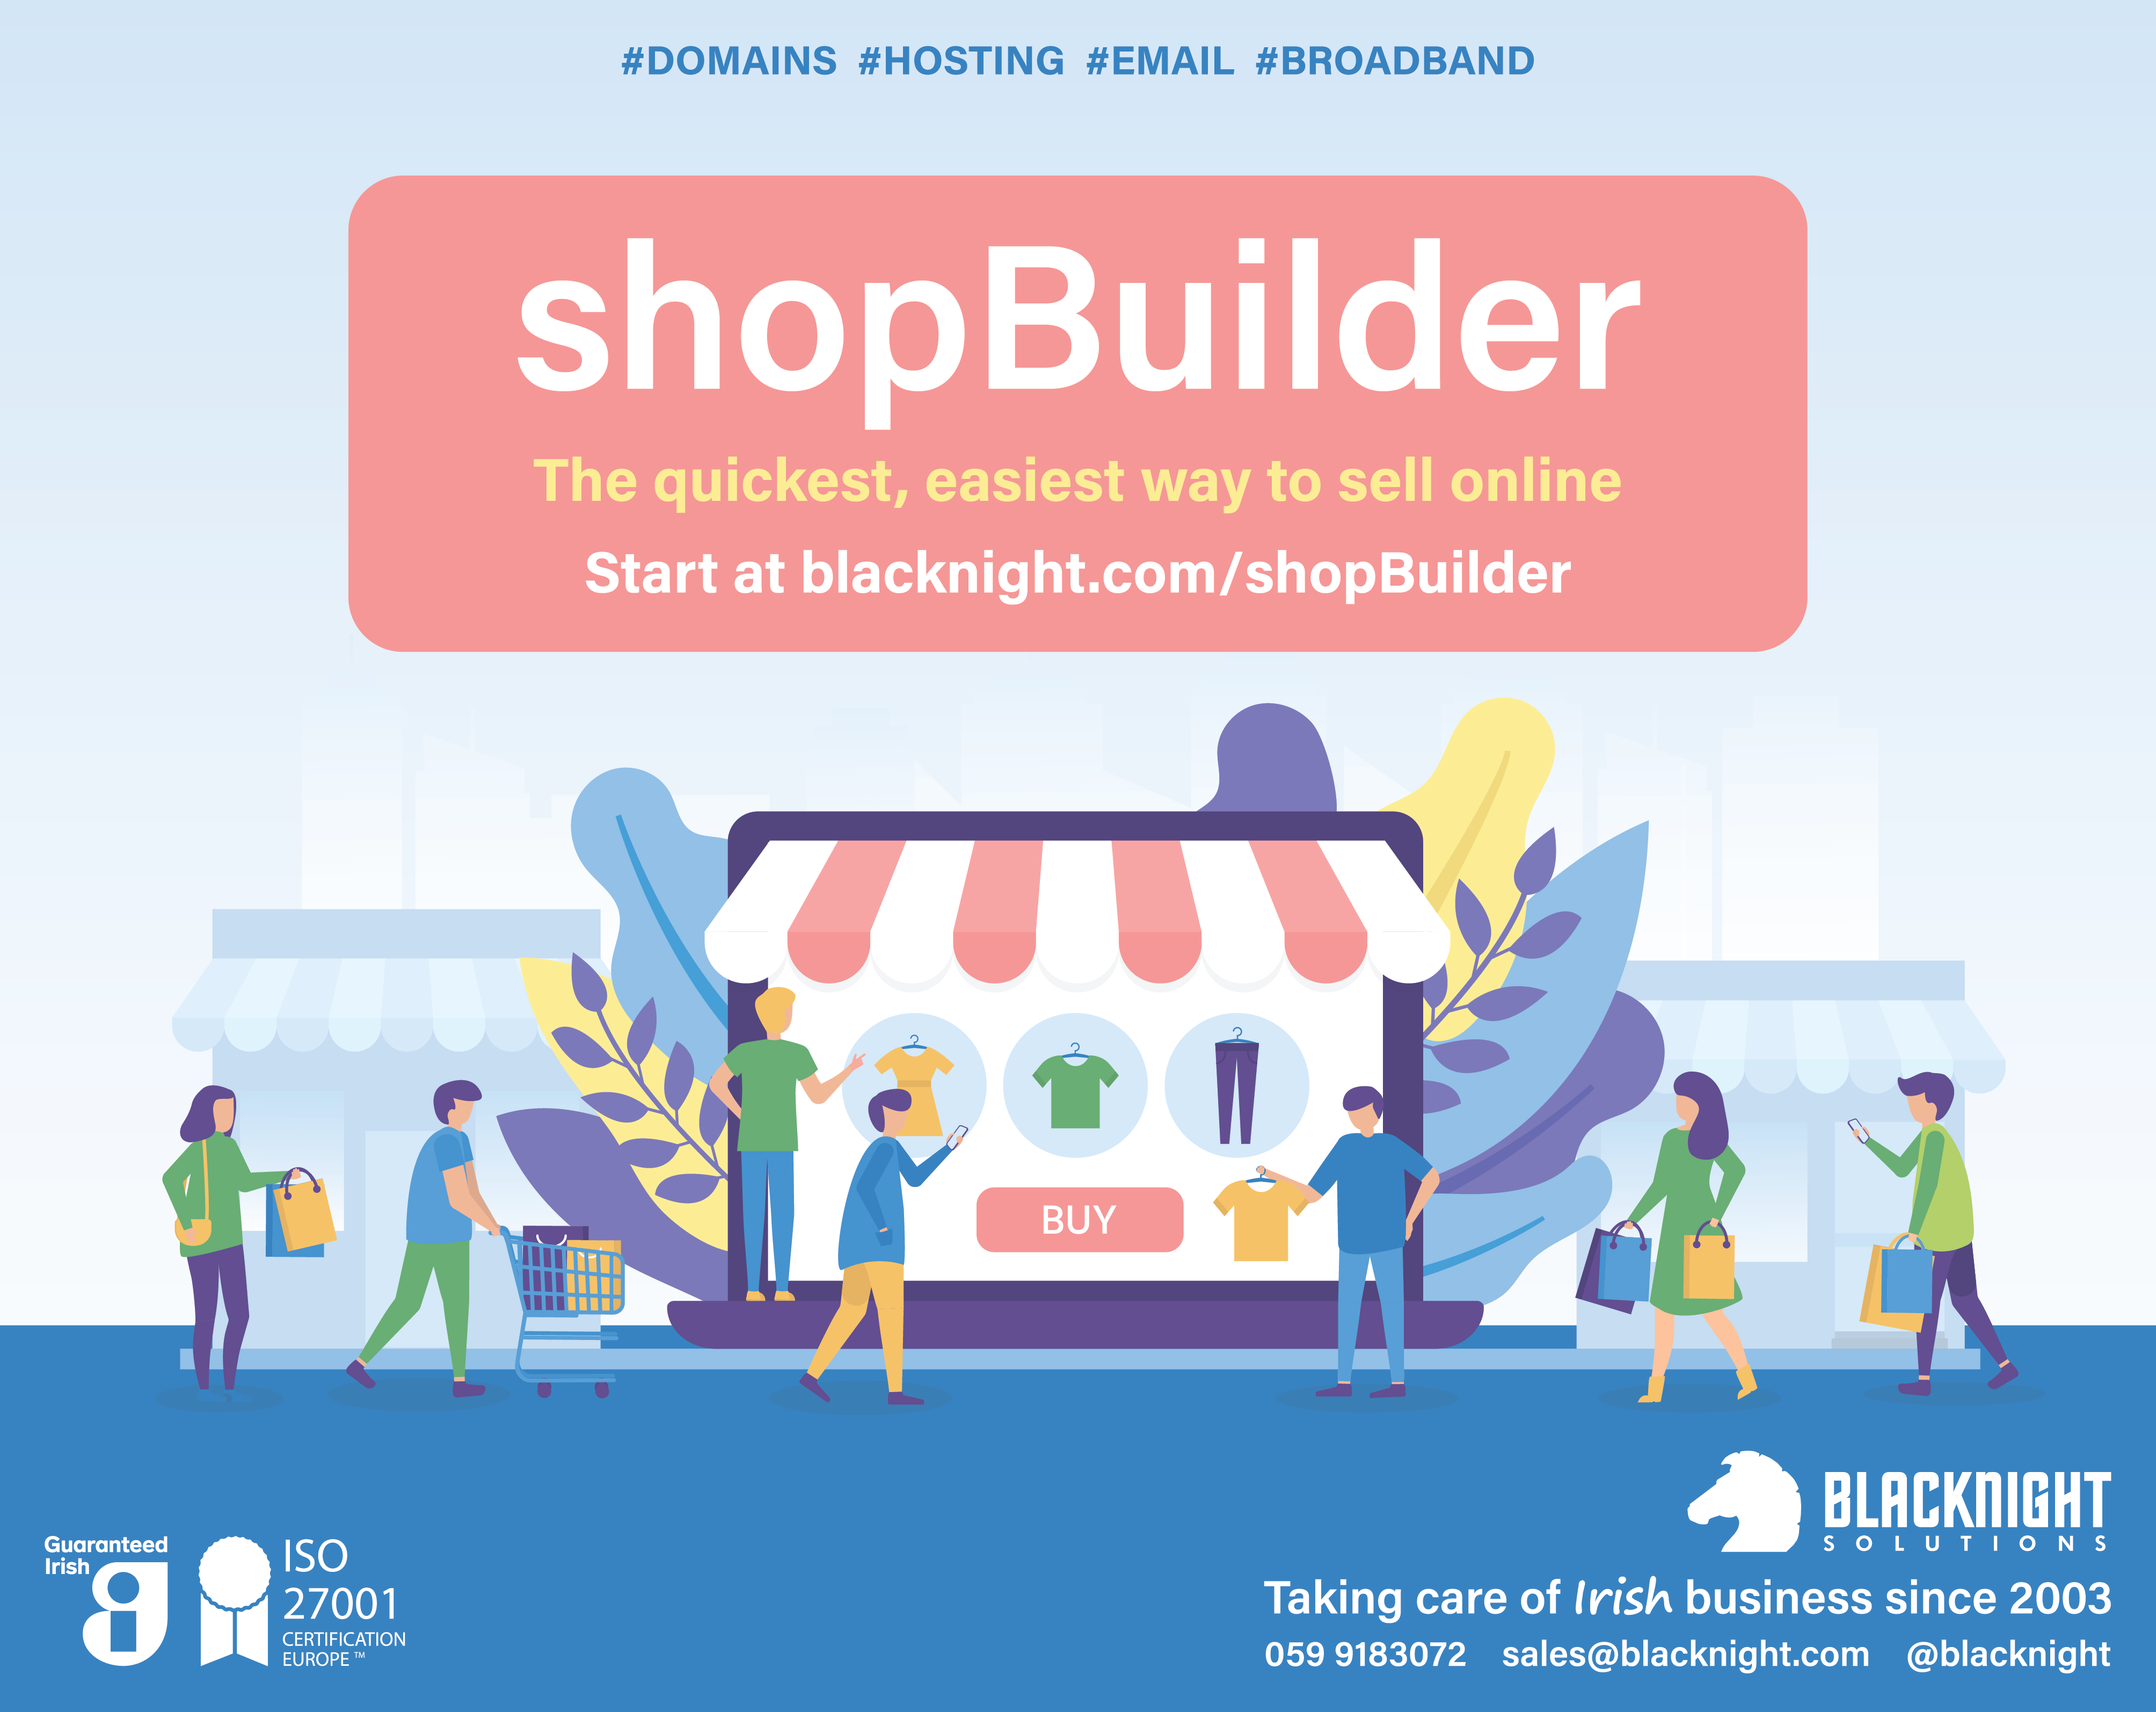 Get your online shop ready with ShopBuilder from Blacknight